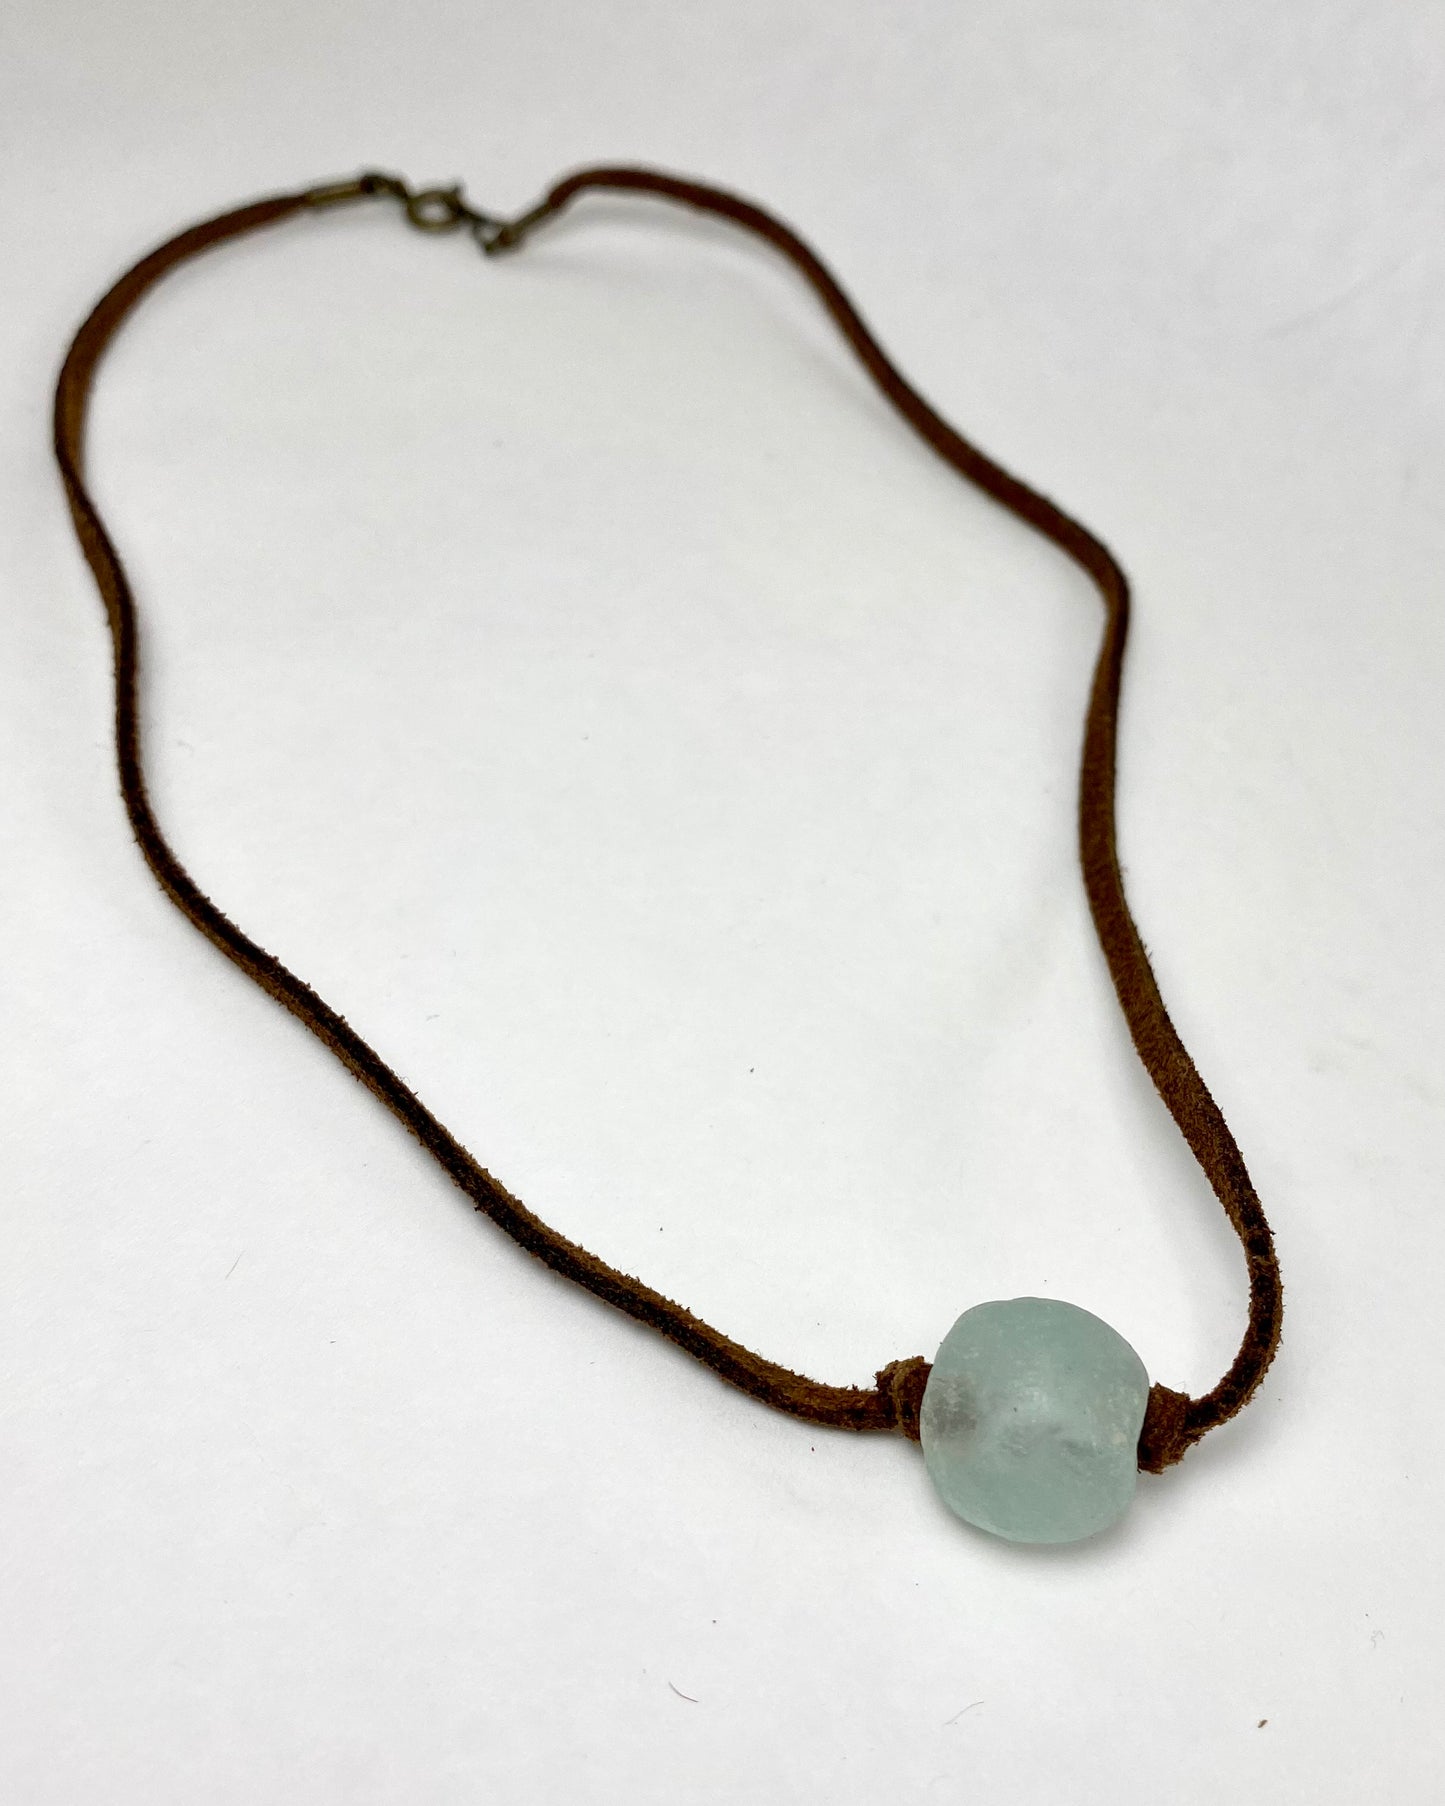 Simple African Trade Bead Necklace